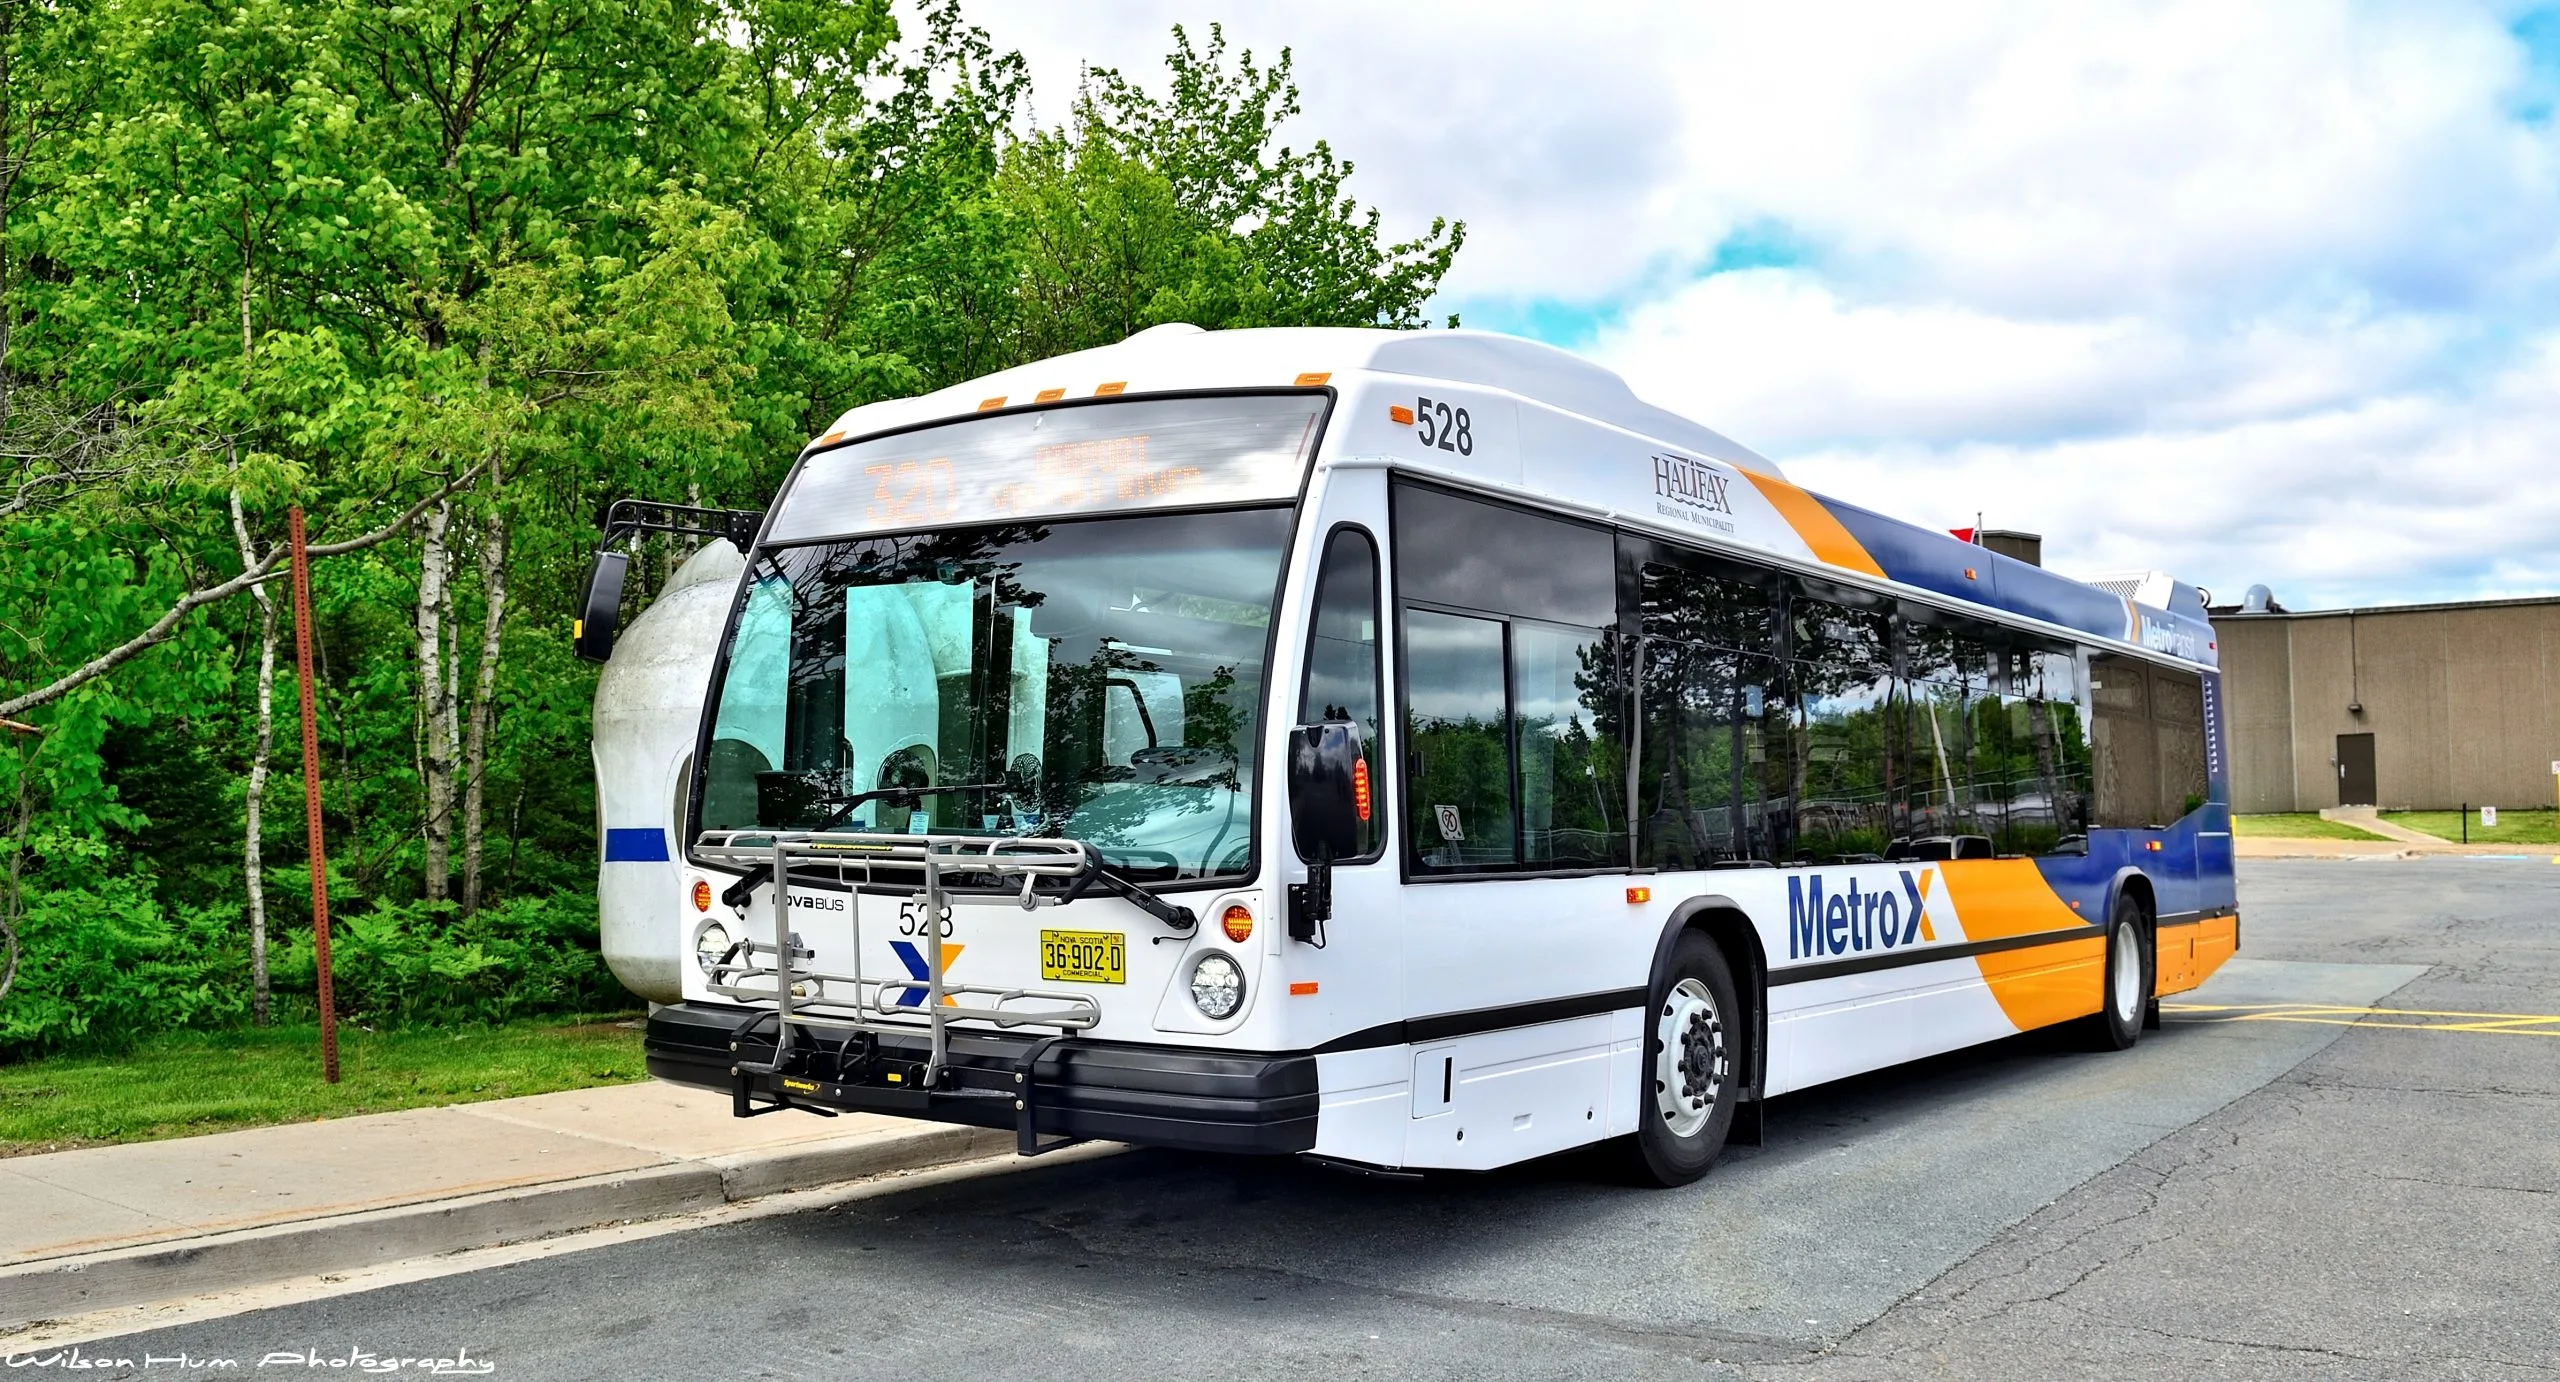 How To Get From Halifax Airport To City Center - All Possible Ways, cheapest way from 
Halifax airport to city center, cheapest way from Halifax airport to downtown, Halifax airport to city center, Halifax airport to city, Halifax airport to downtown, Bus Halifax Airport, Bus Route Halifax Airport, Halifax Airport Bus 320